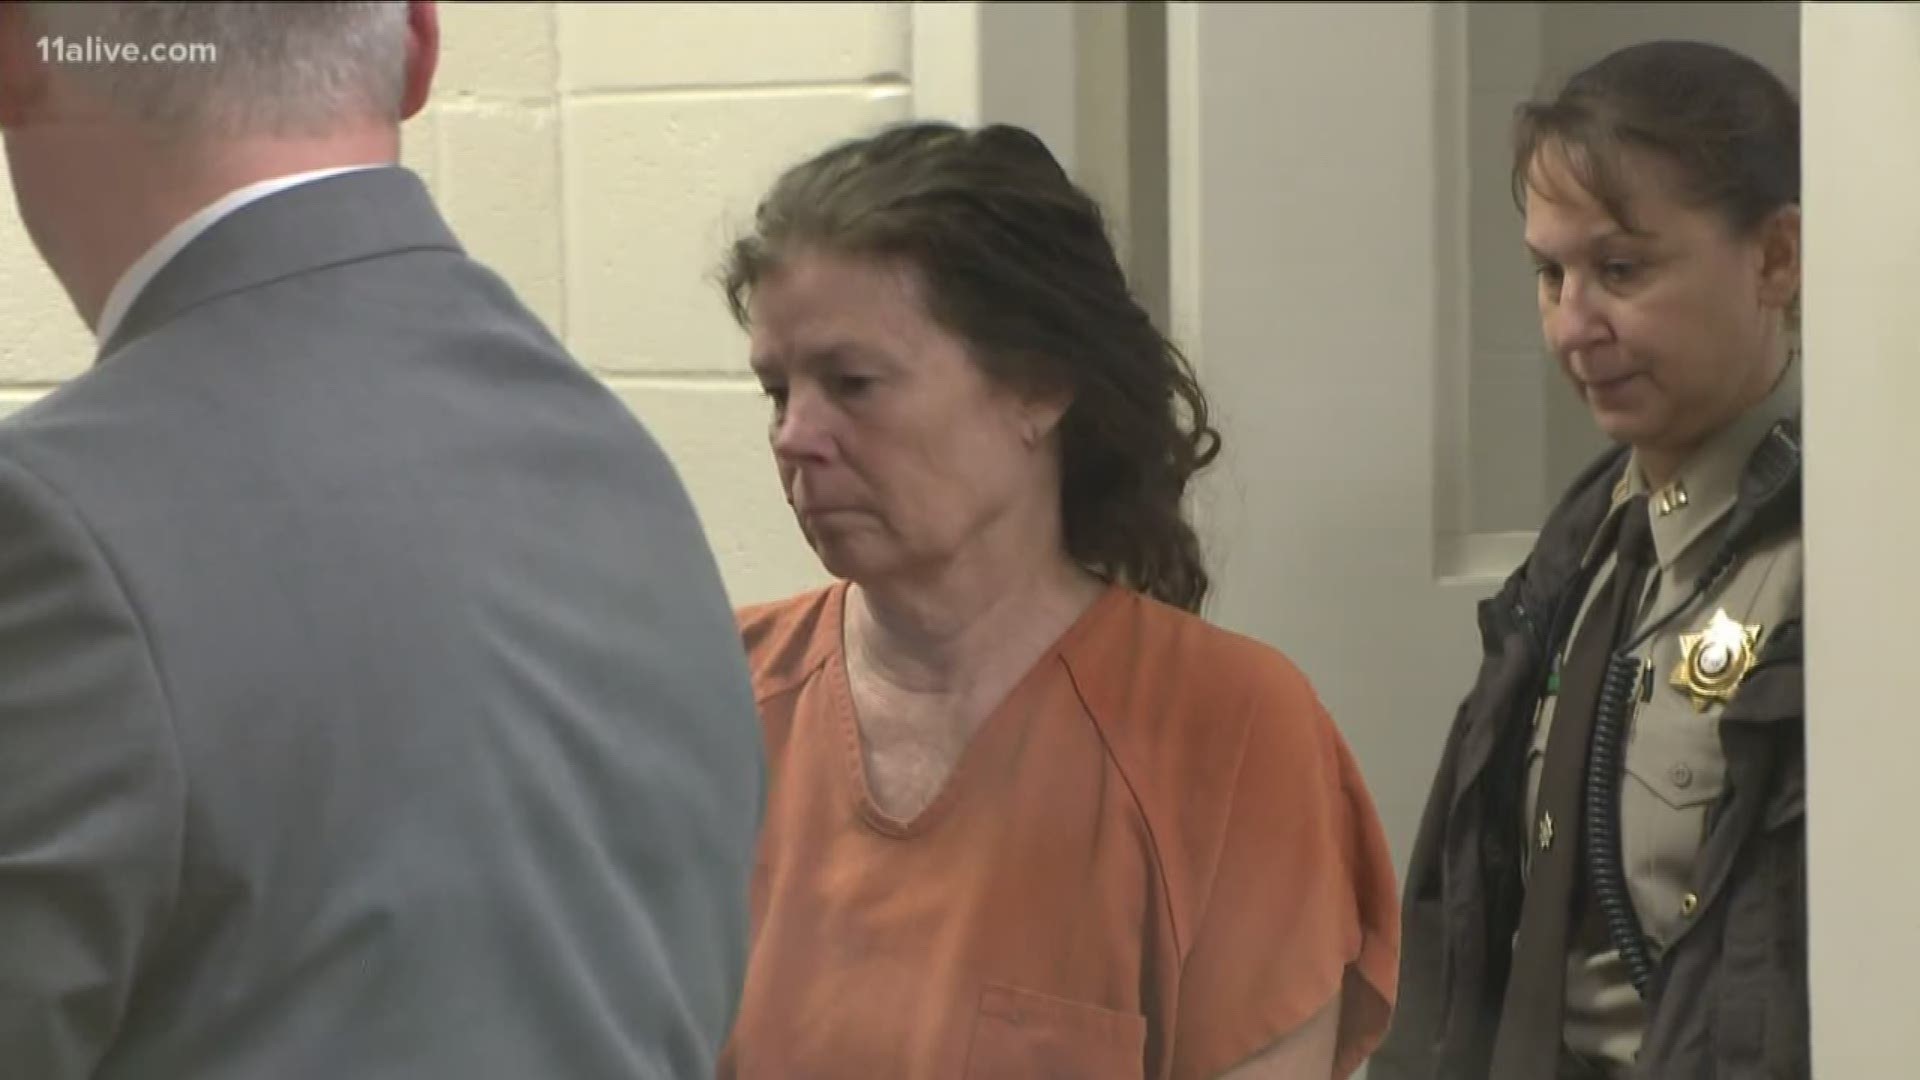 59-year-old Melody Farris is accused in the 2018 shooting death of her husband, prominent metro Atlanta attorney Gary Farris.